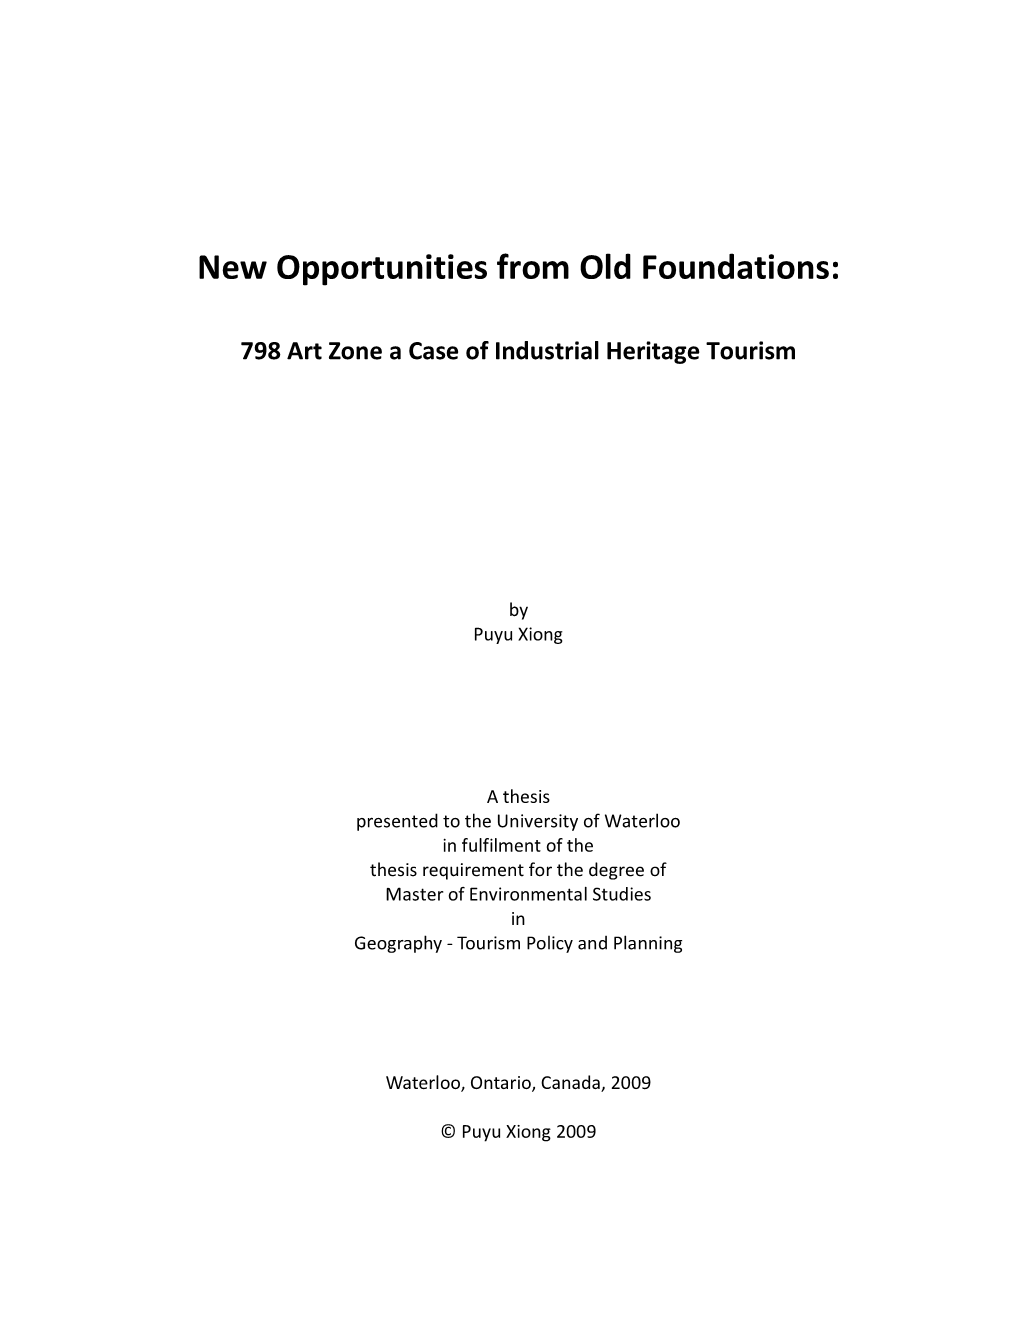 New Opportunities from Old Foundations: 798 Art Zone a Case